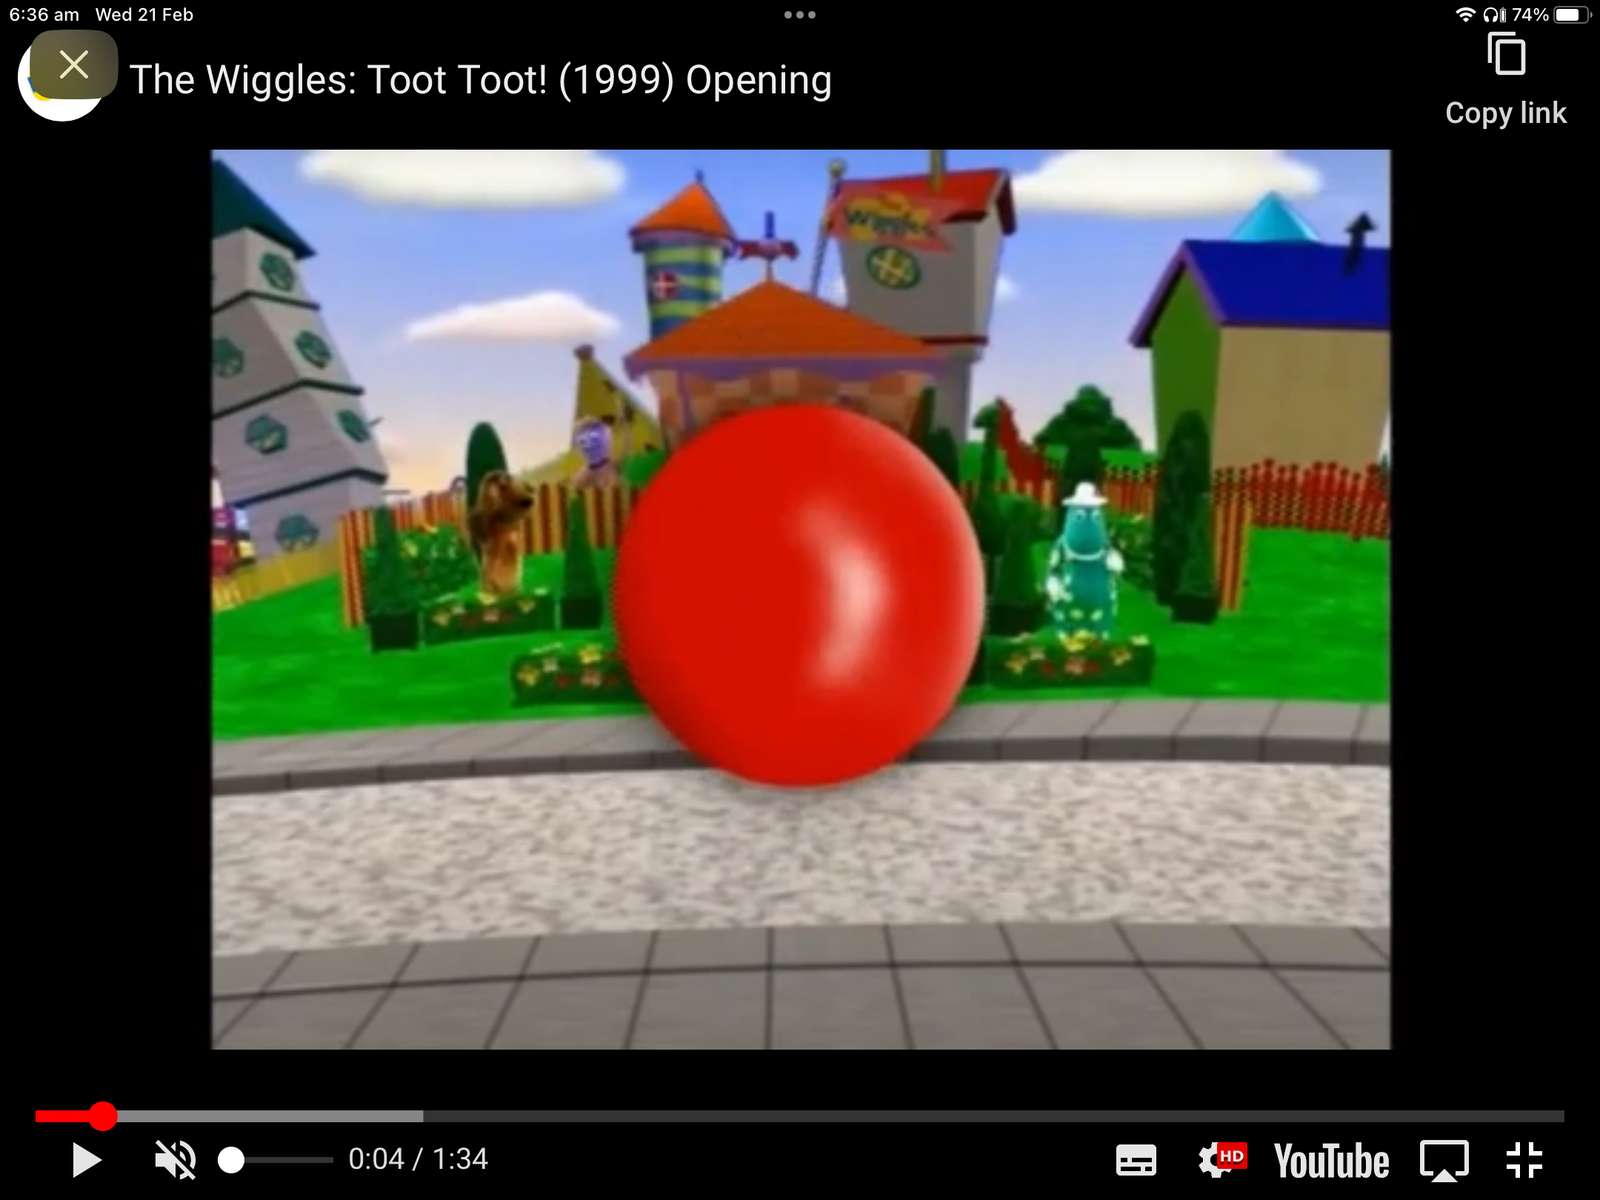 The Wiggles Toot Toot 1999 puzzle online